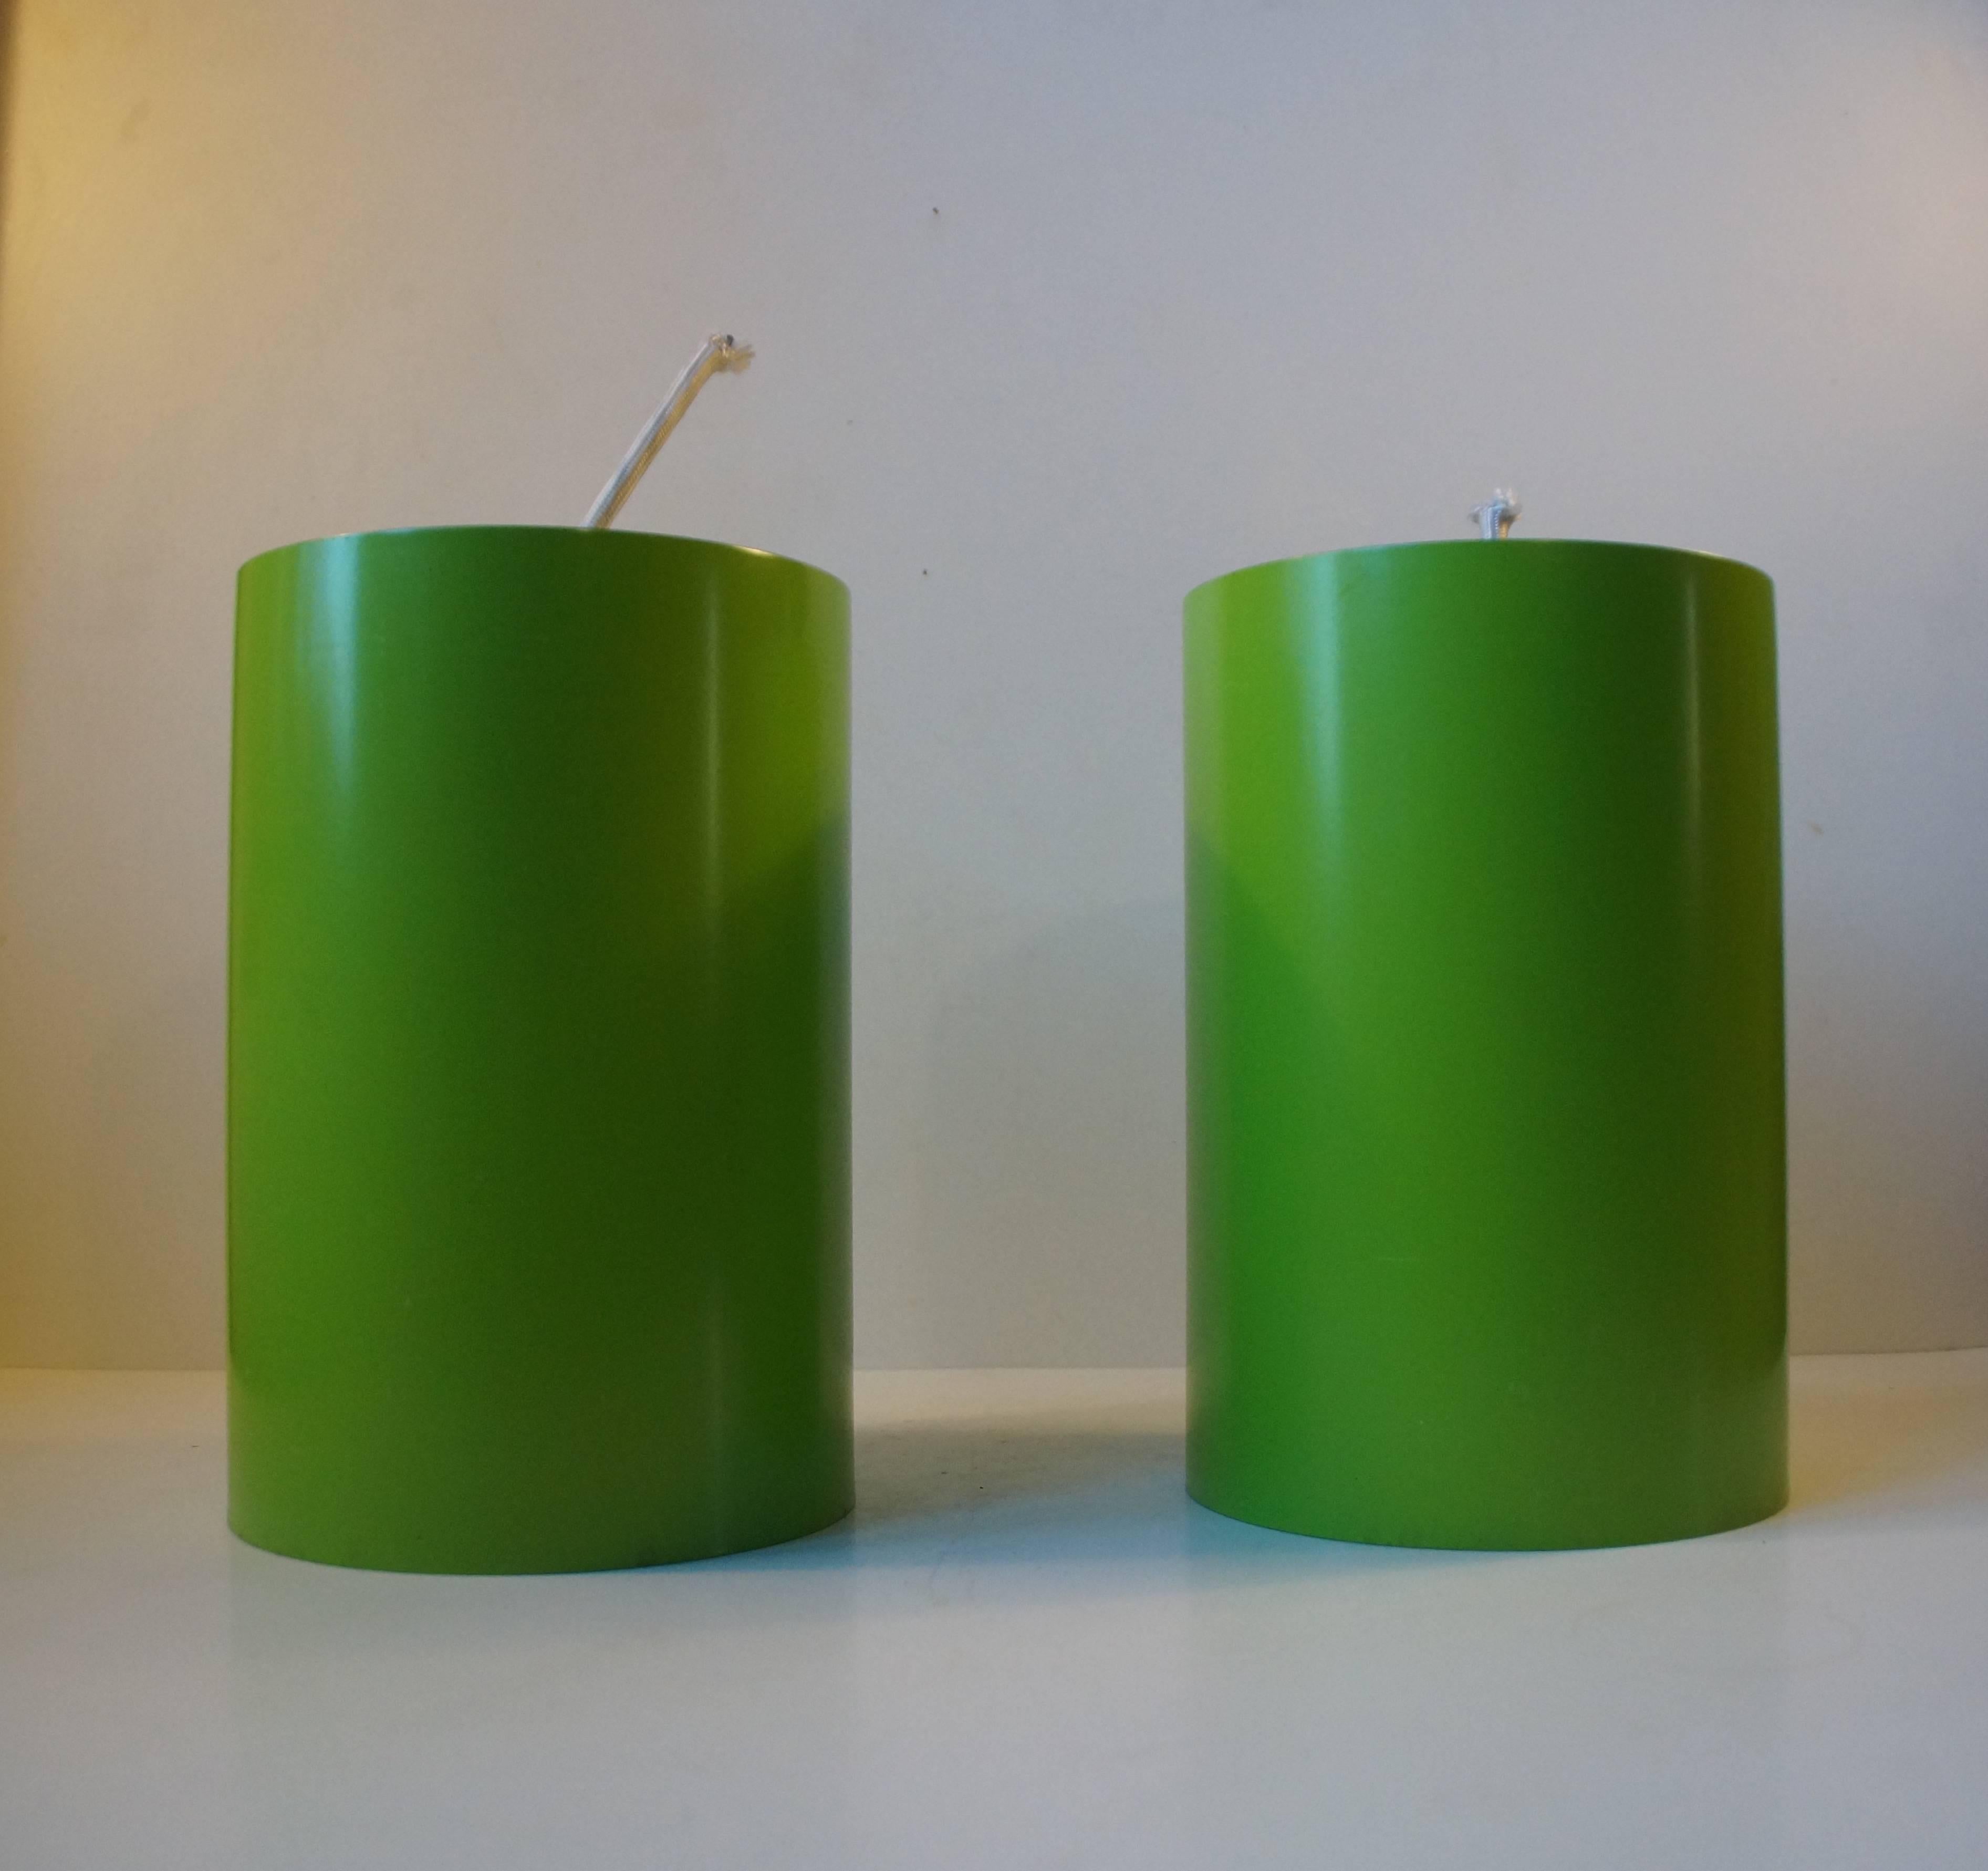 Powder-Coated Pair of Cylindrical Avocado Green Pendant Lamps by Louis Poulsen, Denmark, 1970s